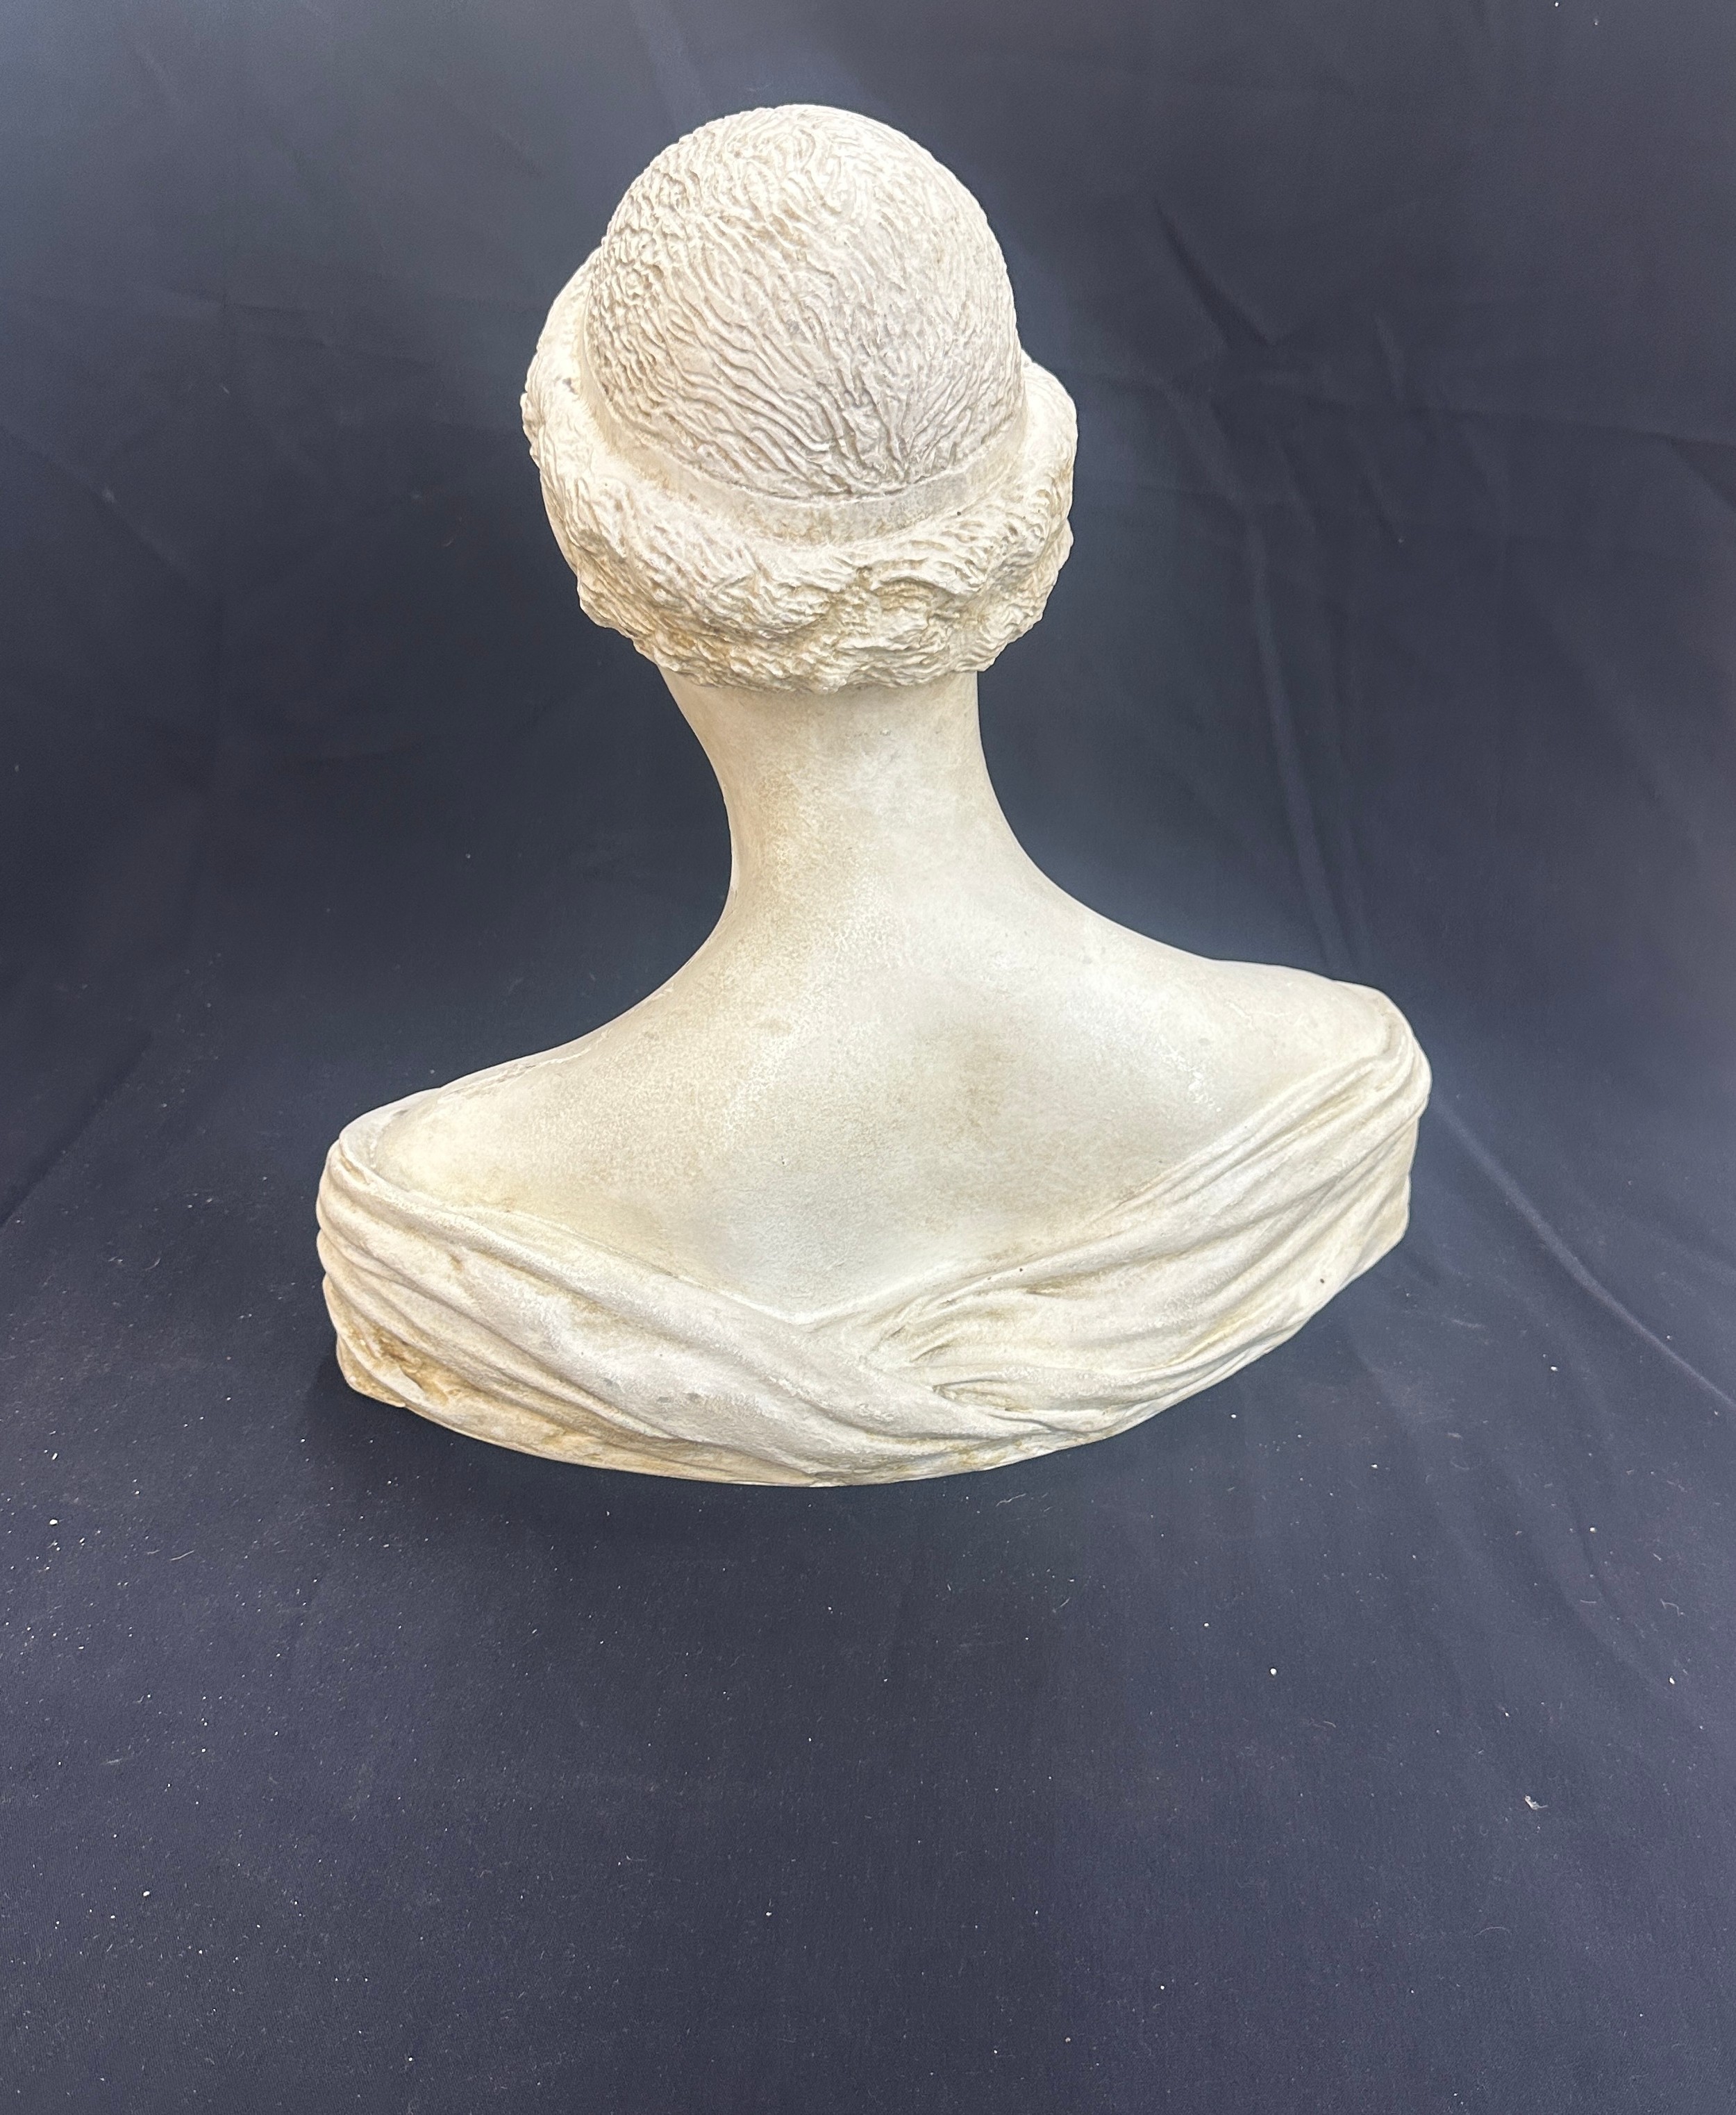 Julies ceaser bust height 18 inches - Image 4 of 5